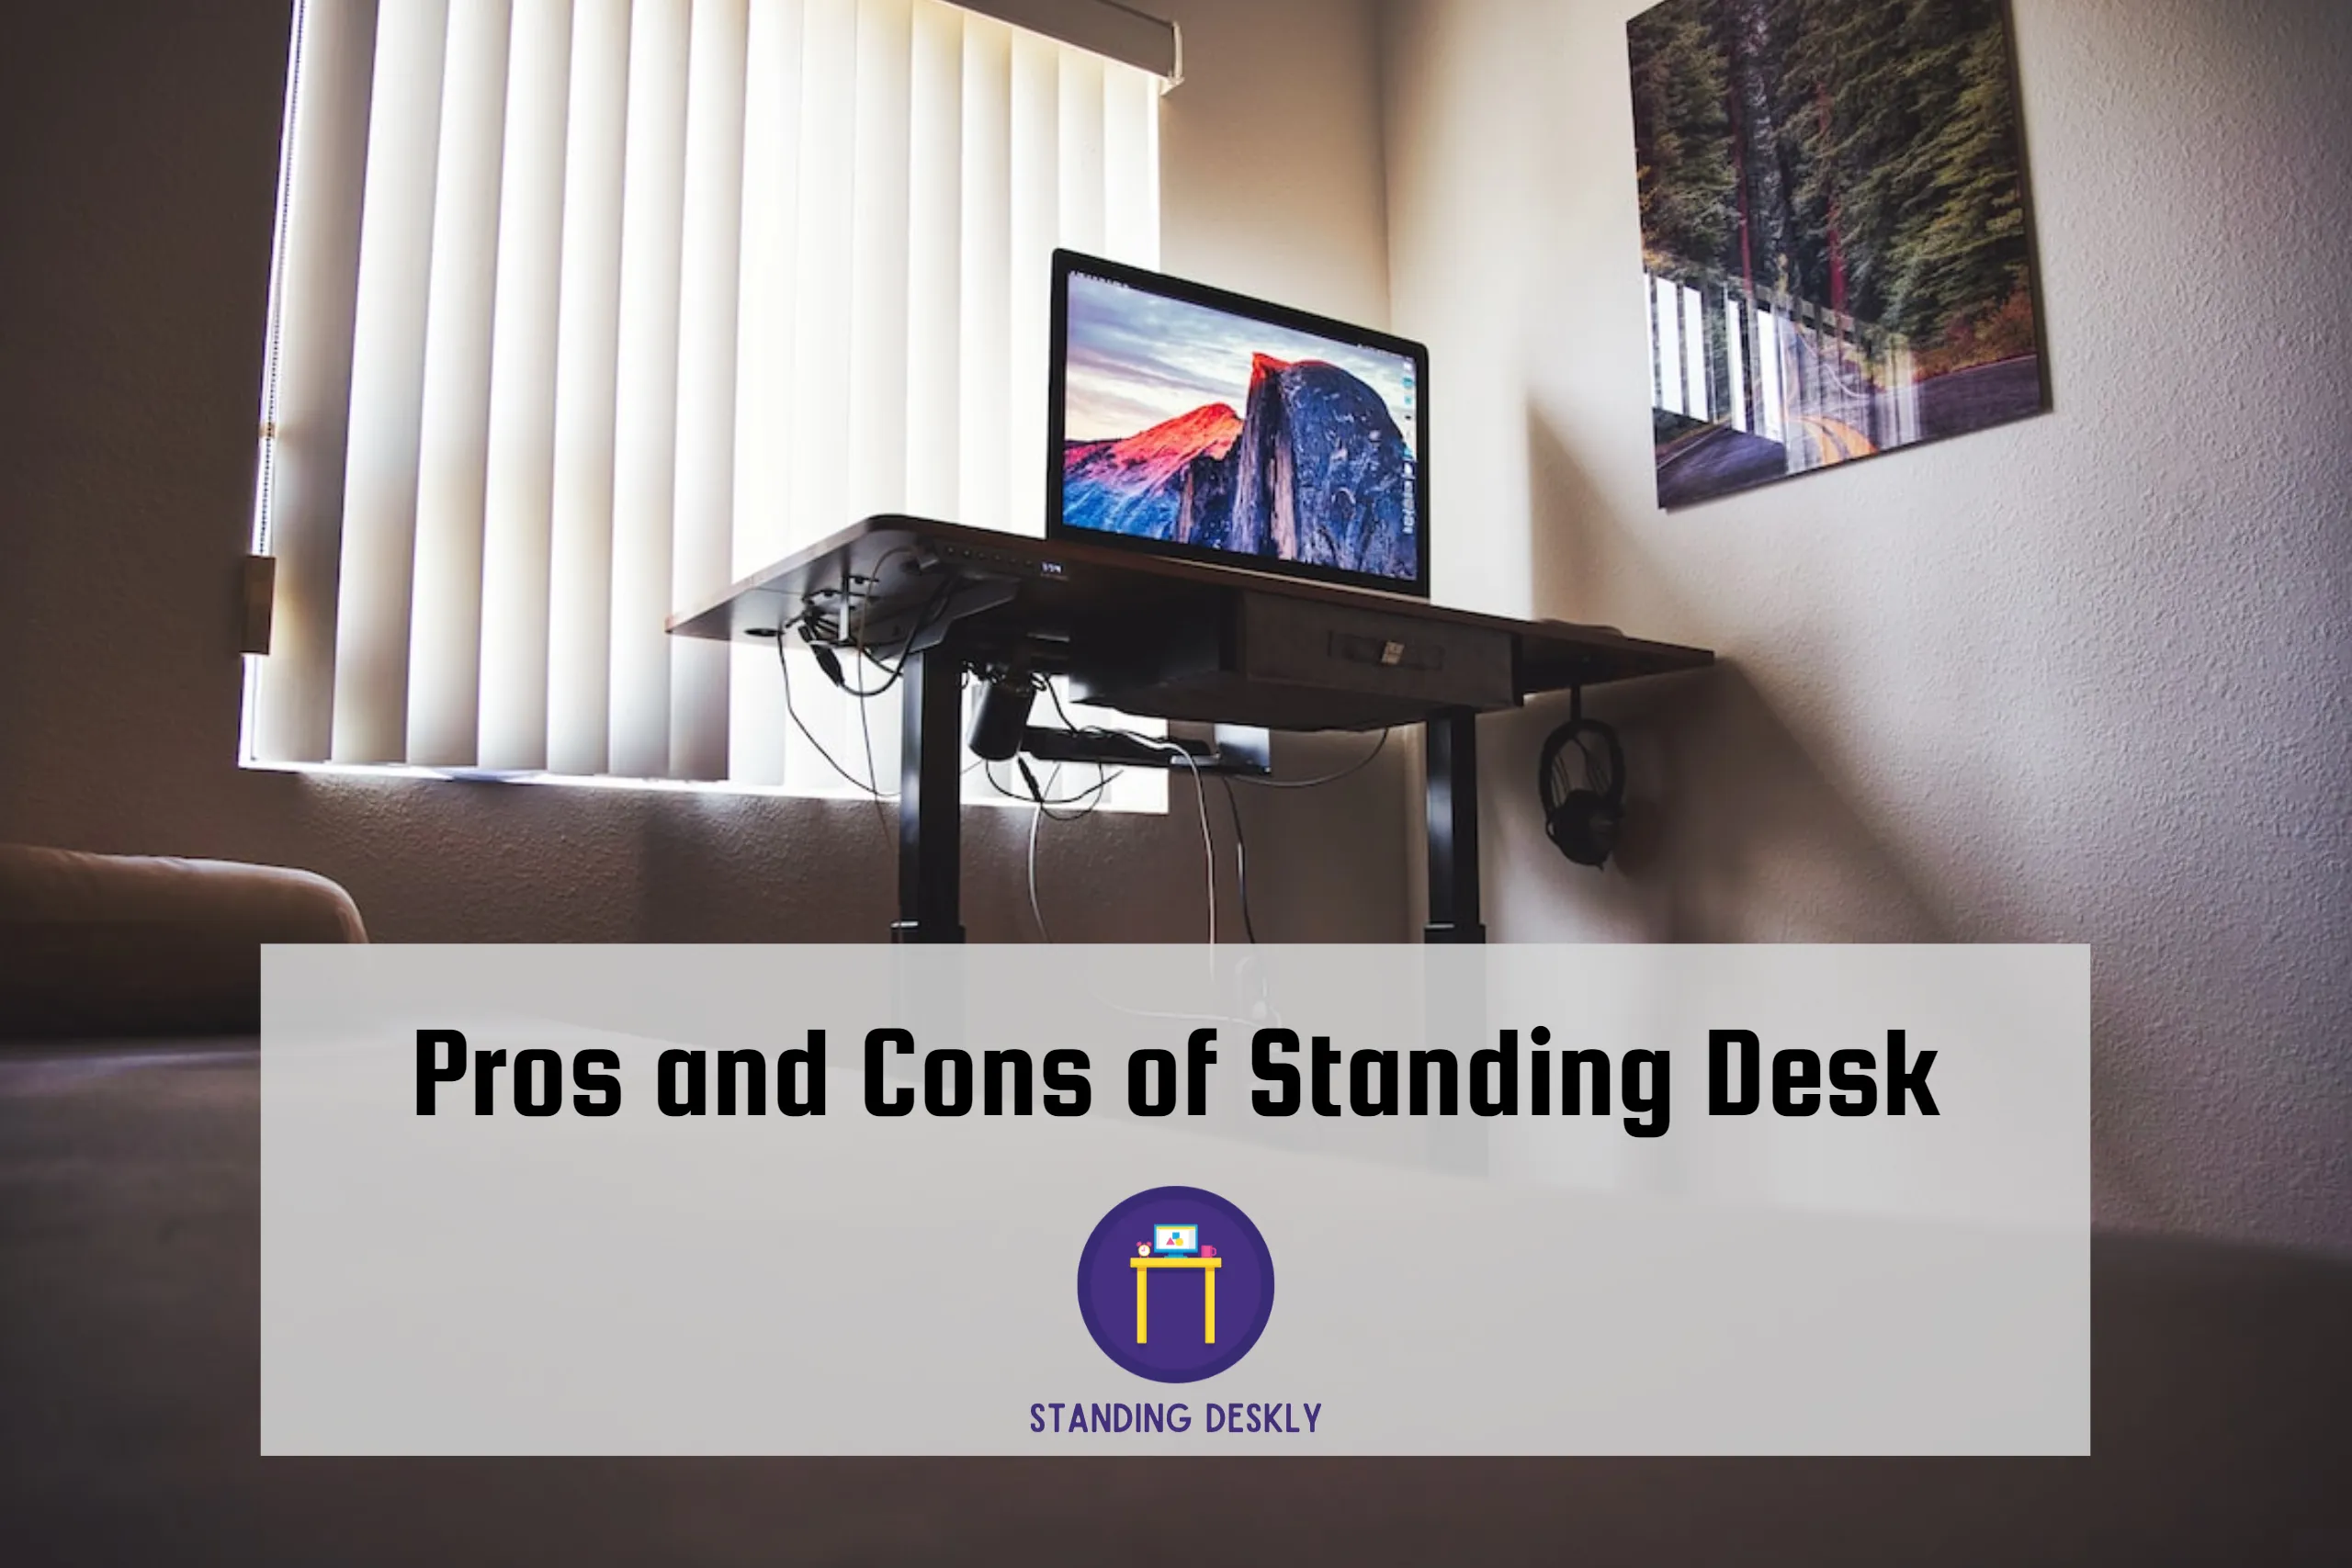 Pros and Cons of Standing Desk